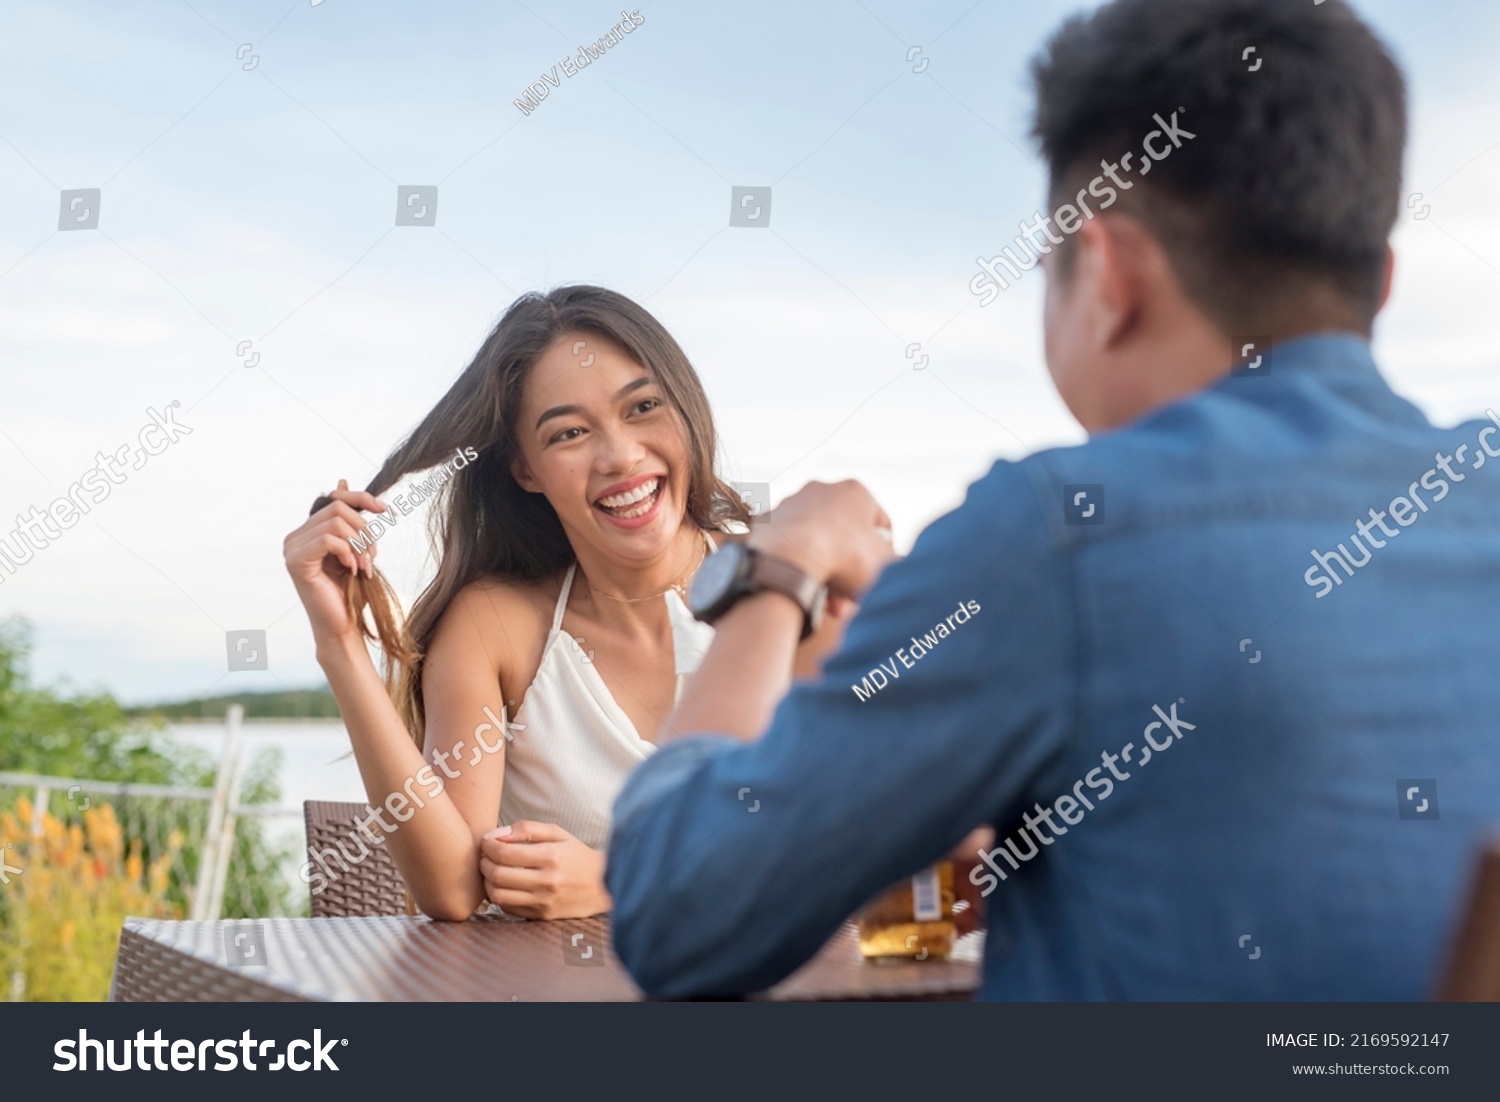 A young woman twirls her hair while listening intently to her date. Interested and attracted to a man she likes. A first date going well. Outdoor cafe scene. #2169592147